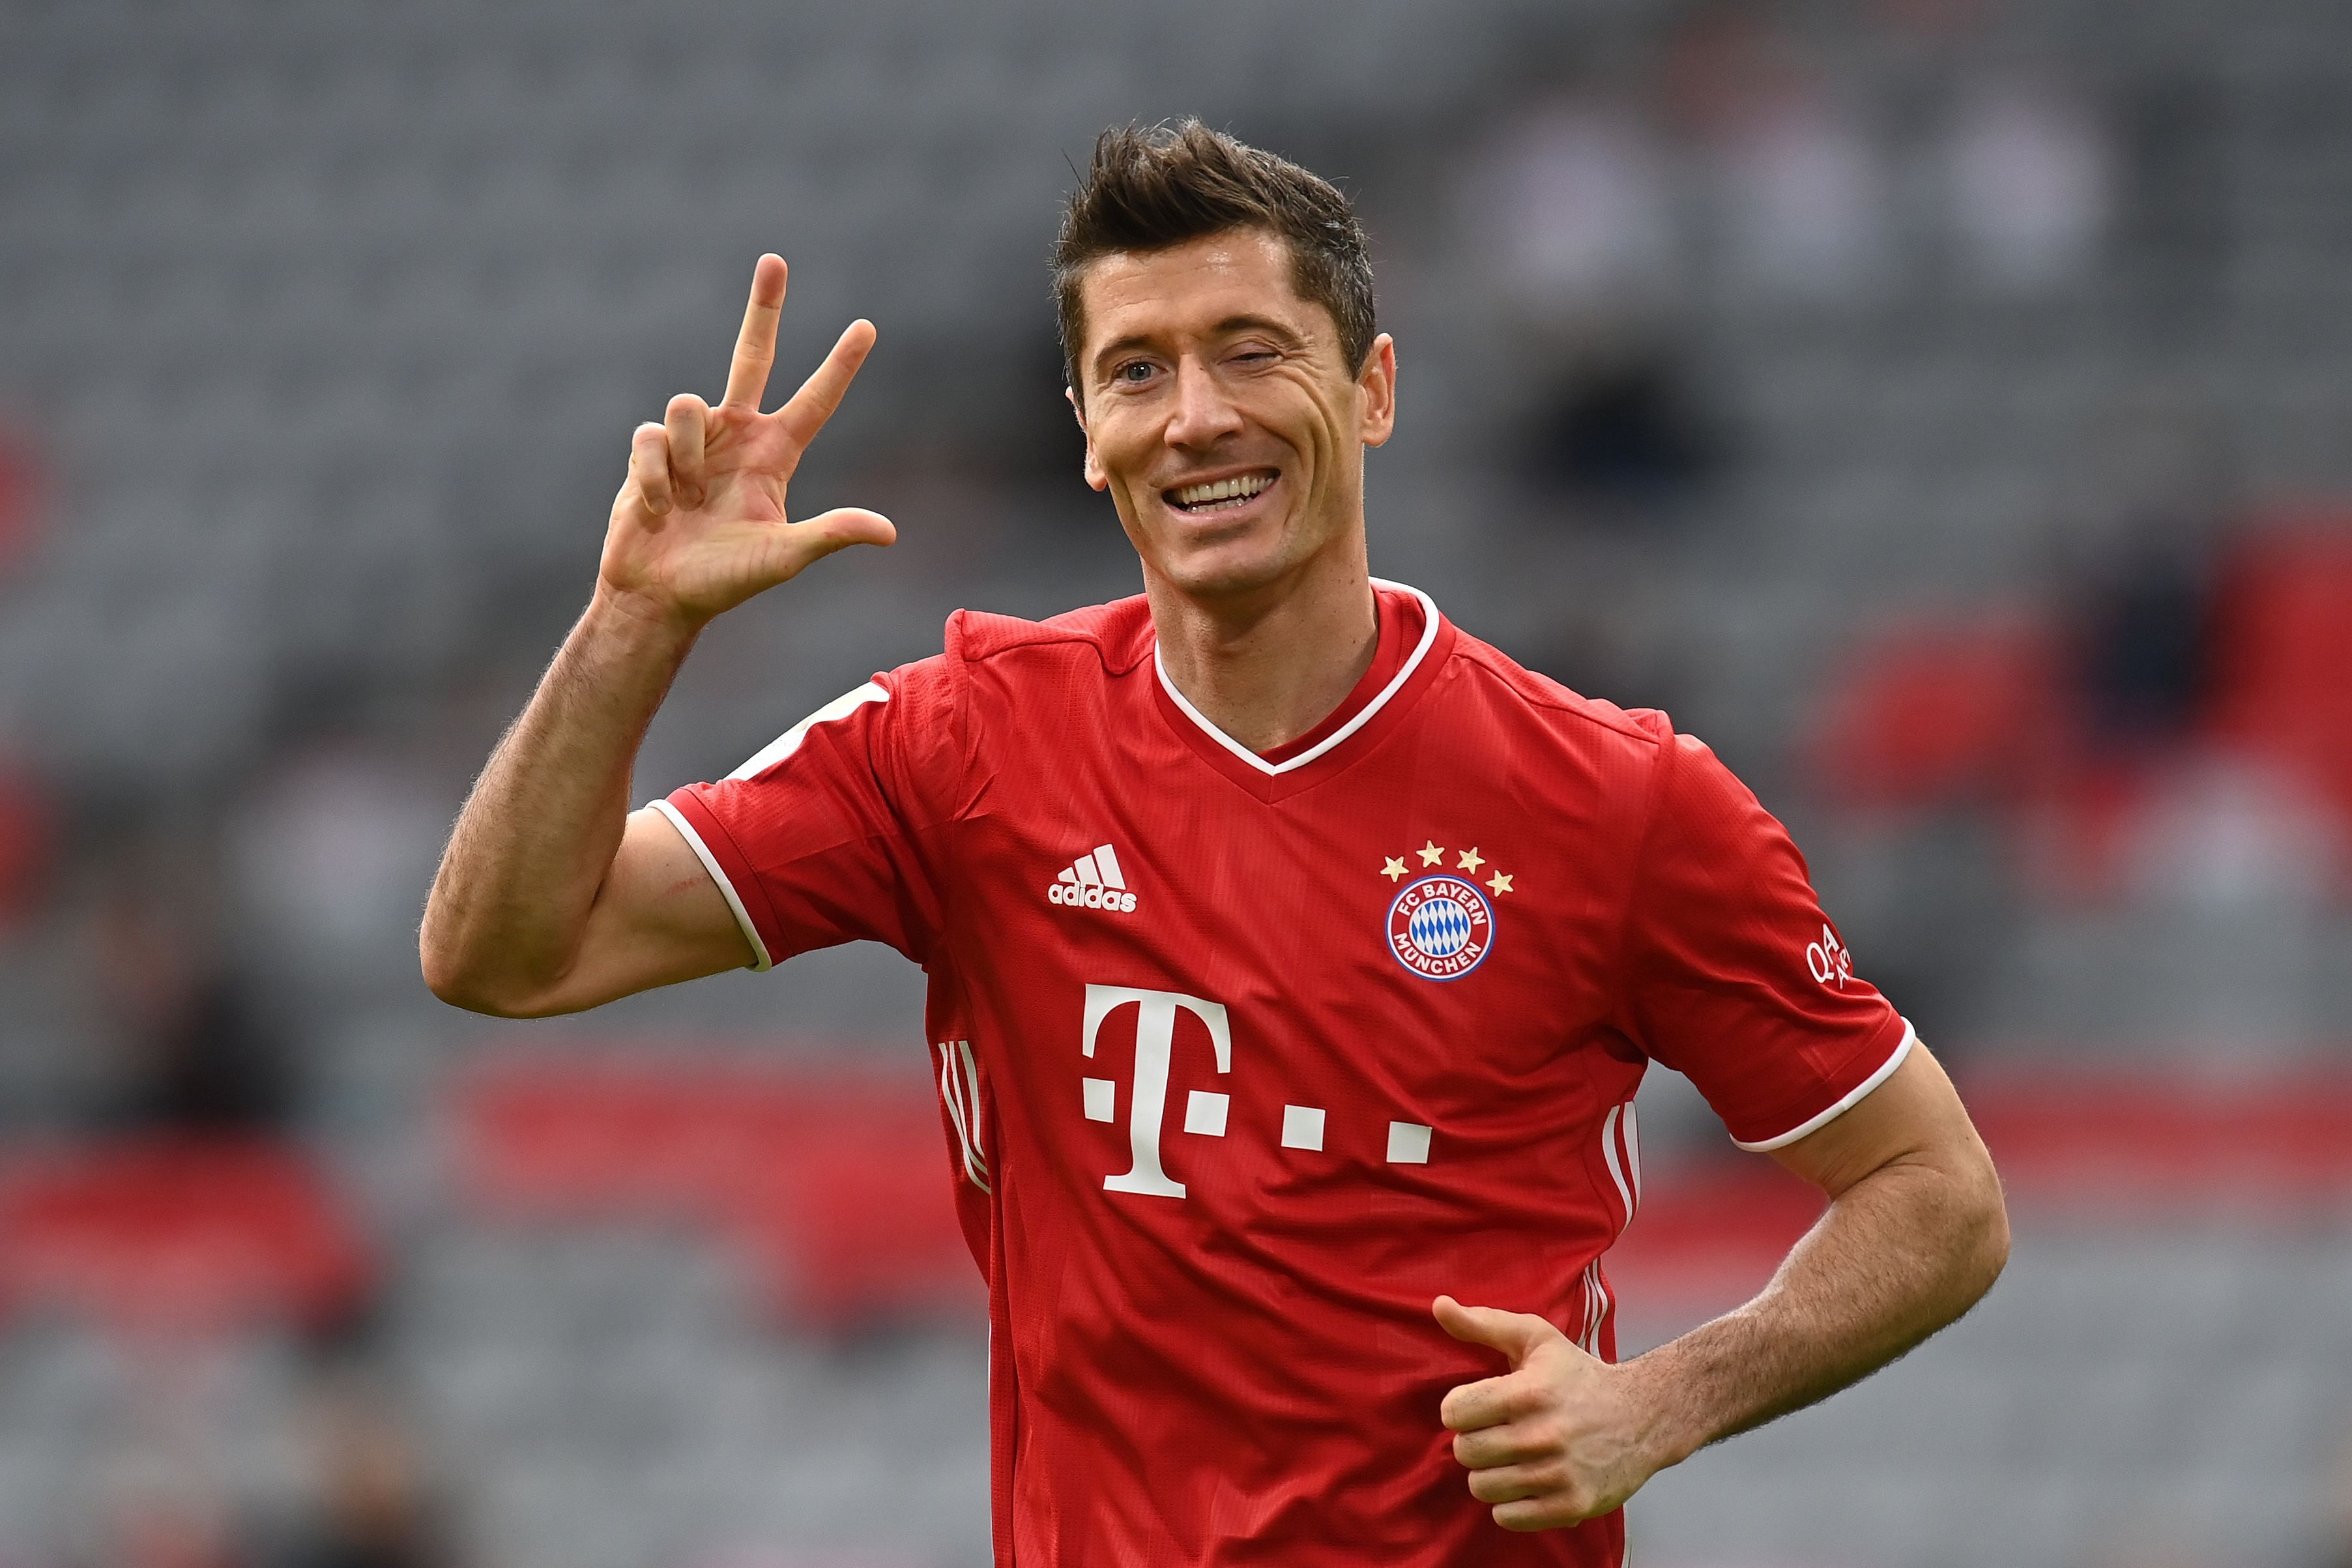 Bayern Munich's Polish forward Robert Lewandowski celebrates scoring the 3-0 goal for his hat-trick during the German first division Bundesliga football match between FC Bayern Munich and Eintracht Frankfurt in Munich, southern Germany. - Bayern Munich striker Robert Lewandowski was named men's player of the year on December 17, 2020 at the FIFA's 'The Best' awards ceremony in Zurich. The 32-year-old Polish forward, top scorer in Europe and winner of the Champions League with Bayern, came out ahead of the other two nominees, Lionel Messi and Cristiano Ronaldo. Credit: AFP File Photo